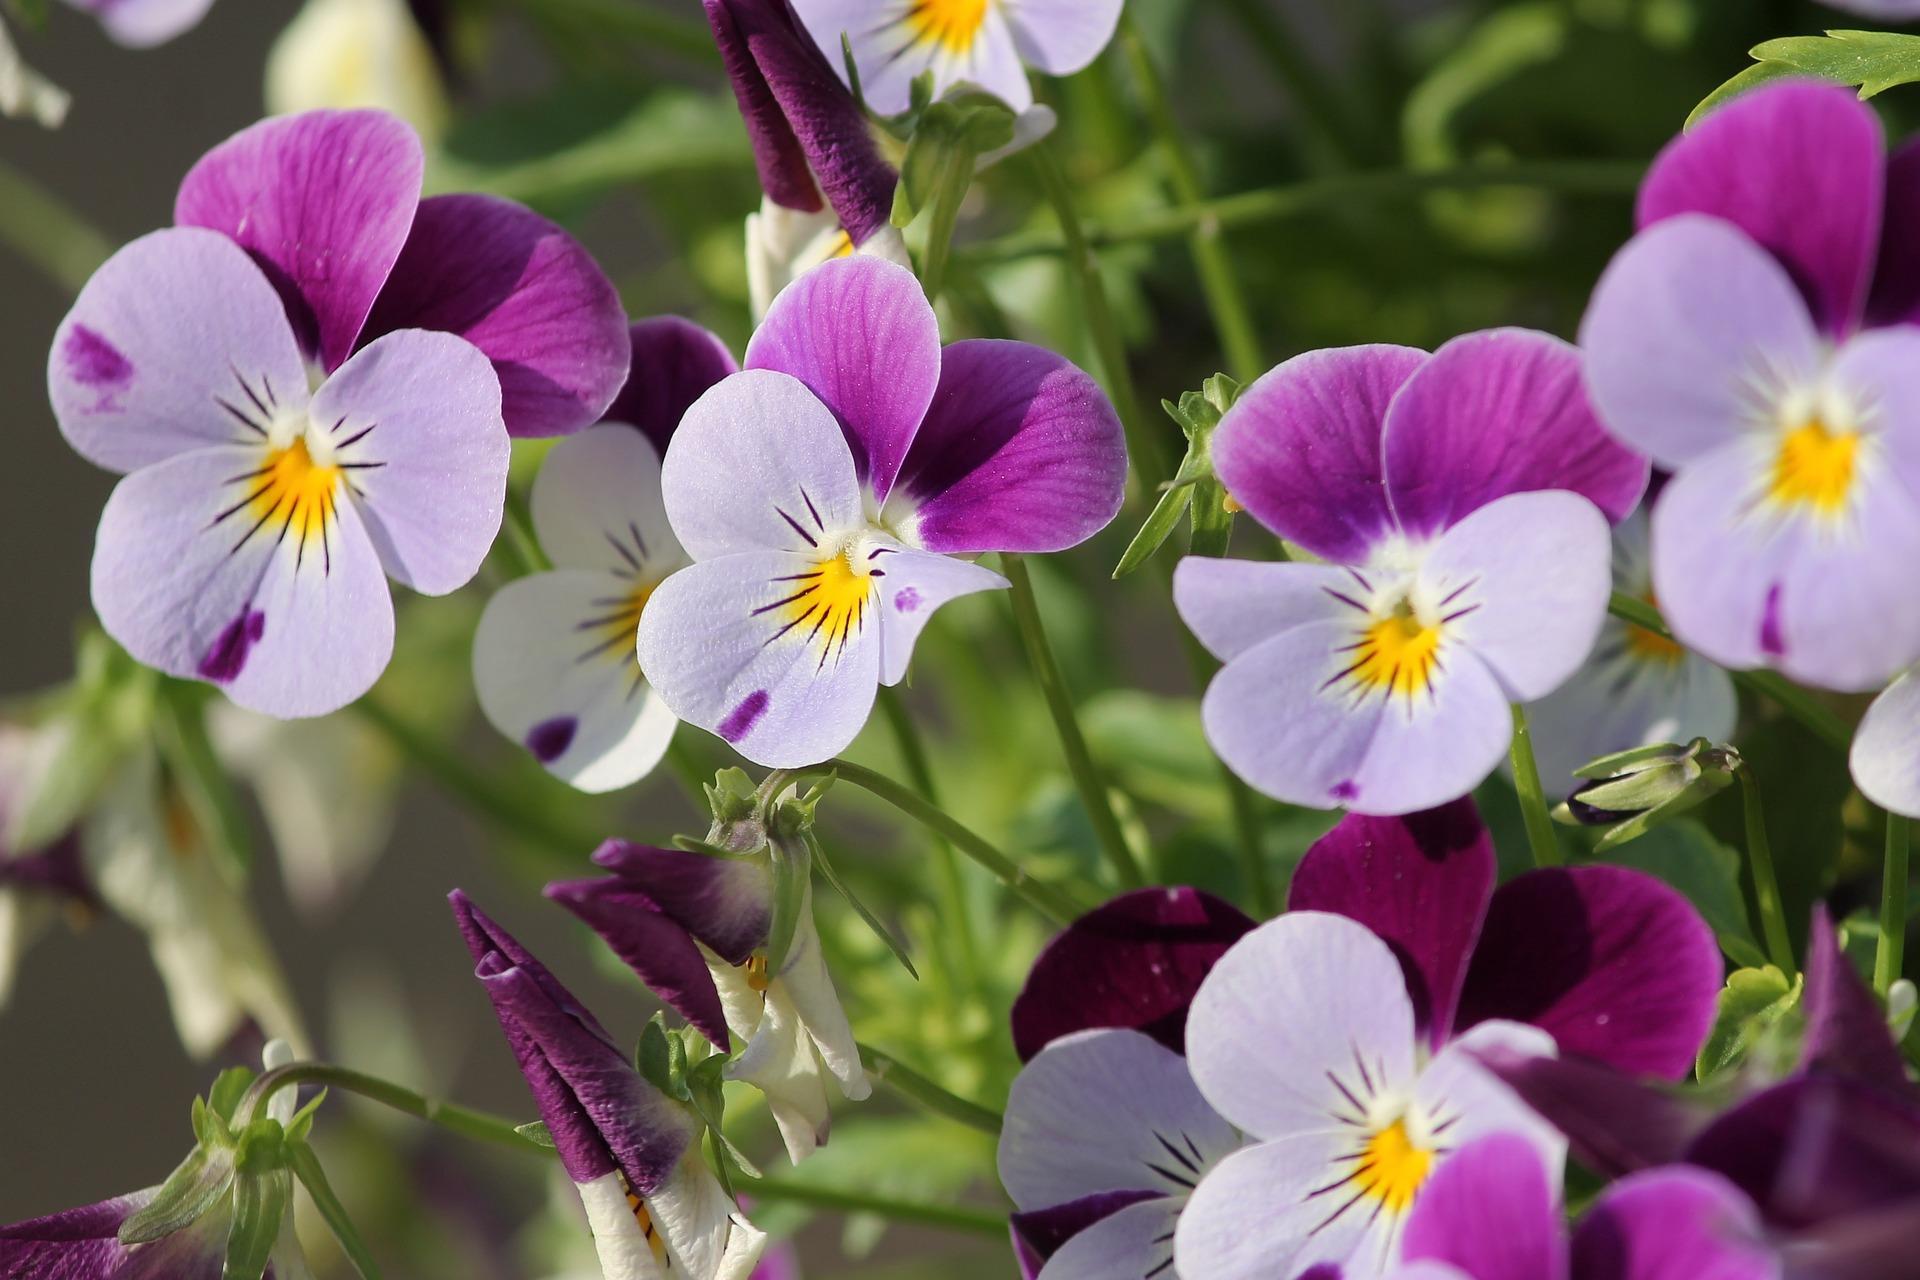 pansy flowers in bloom